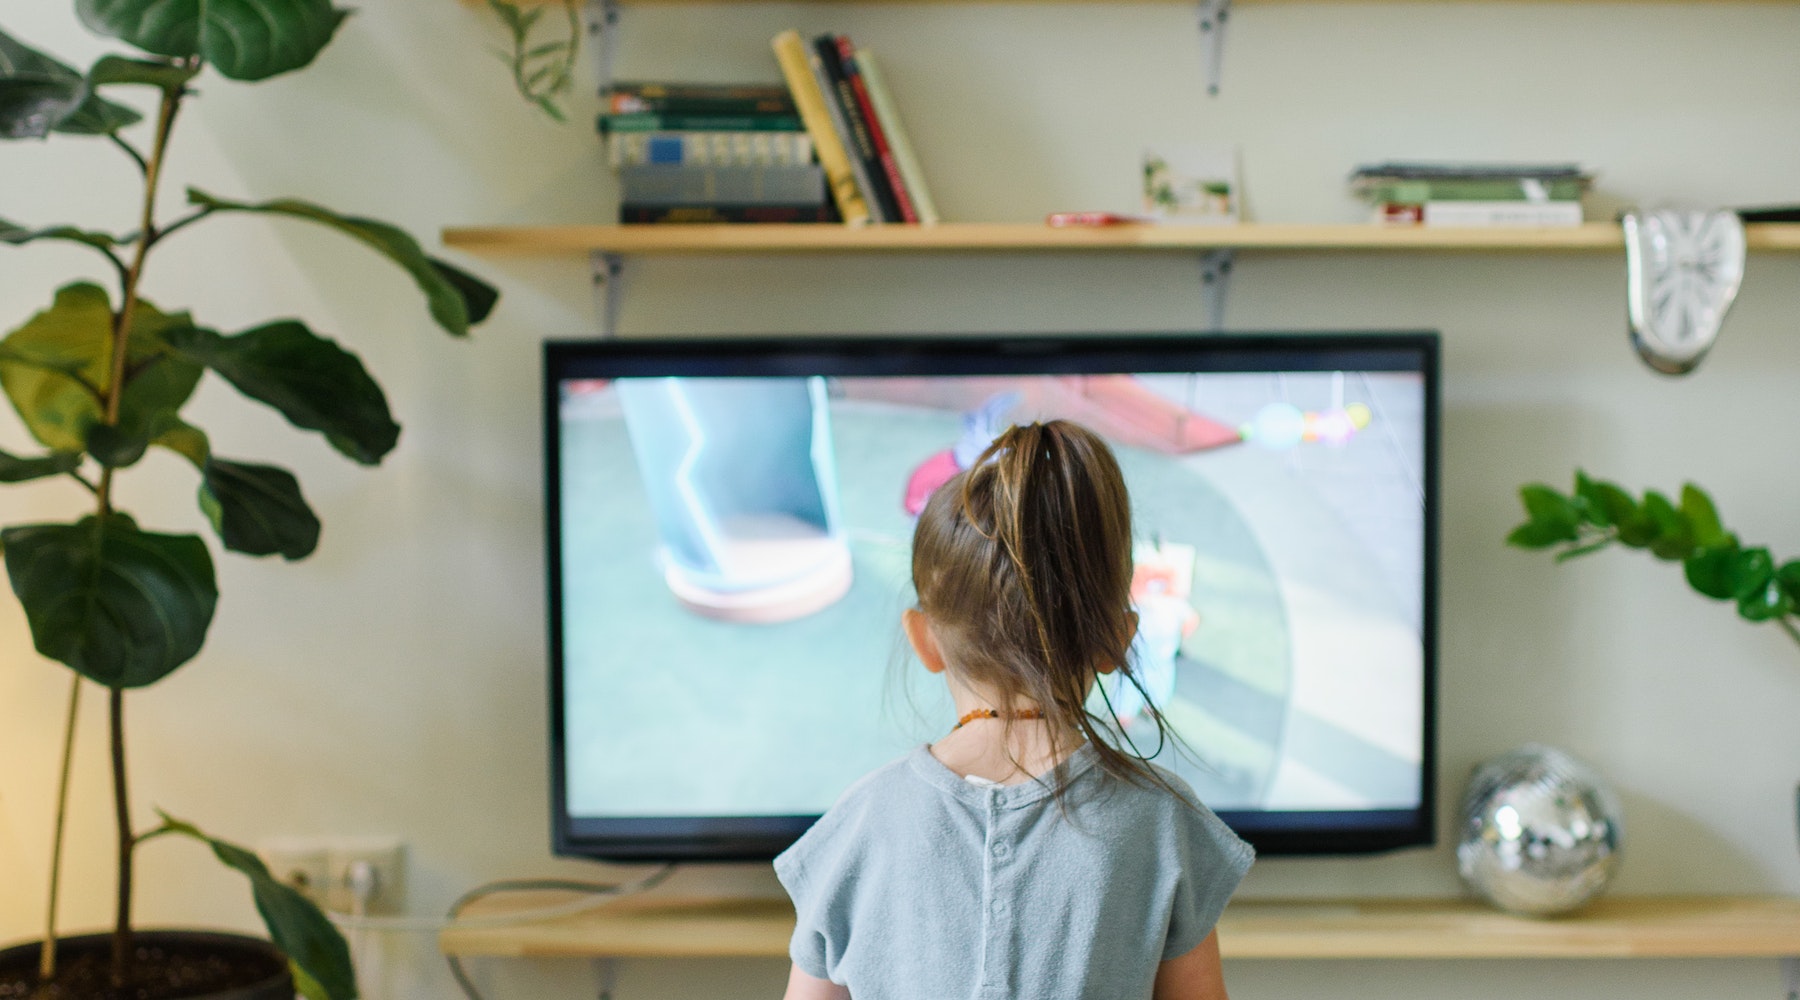 How can parents manage screen time effectively?